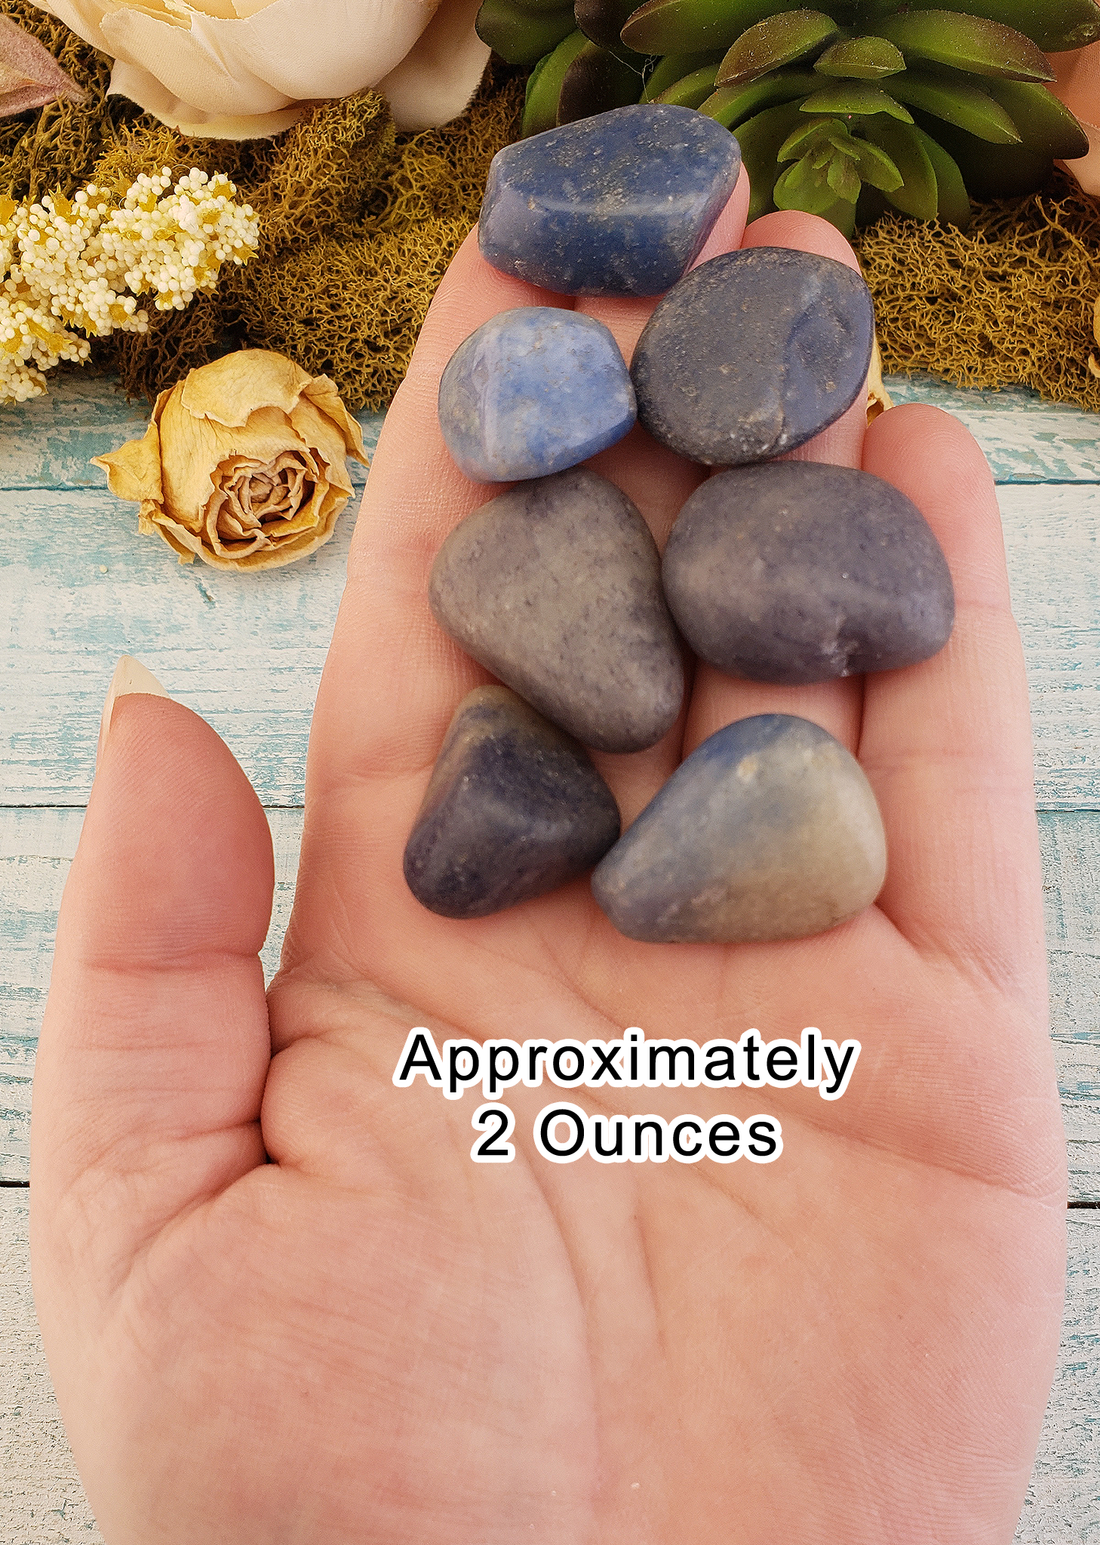 Blue Quartz Tumbled Gemstone - Small One Stone or Bulk Wholesale Lots - 2 Ounces in Hand